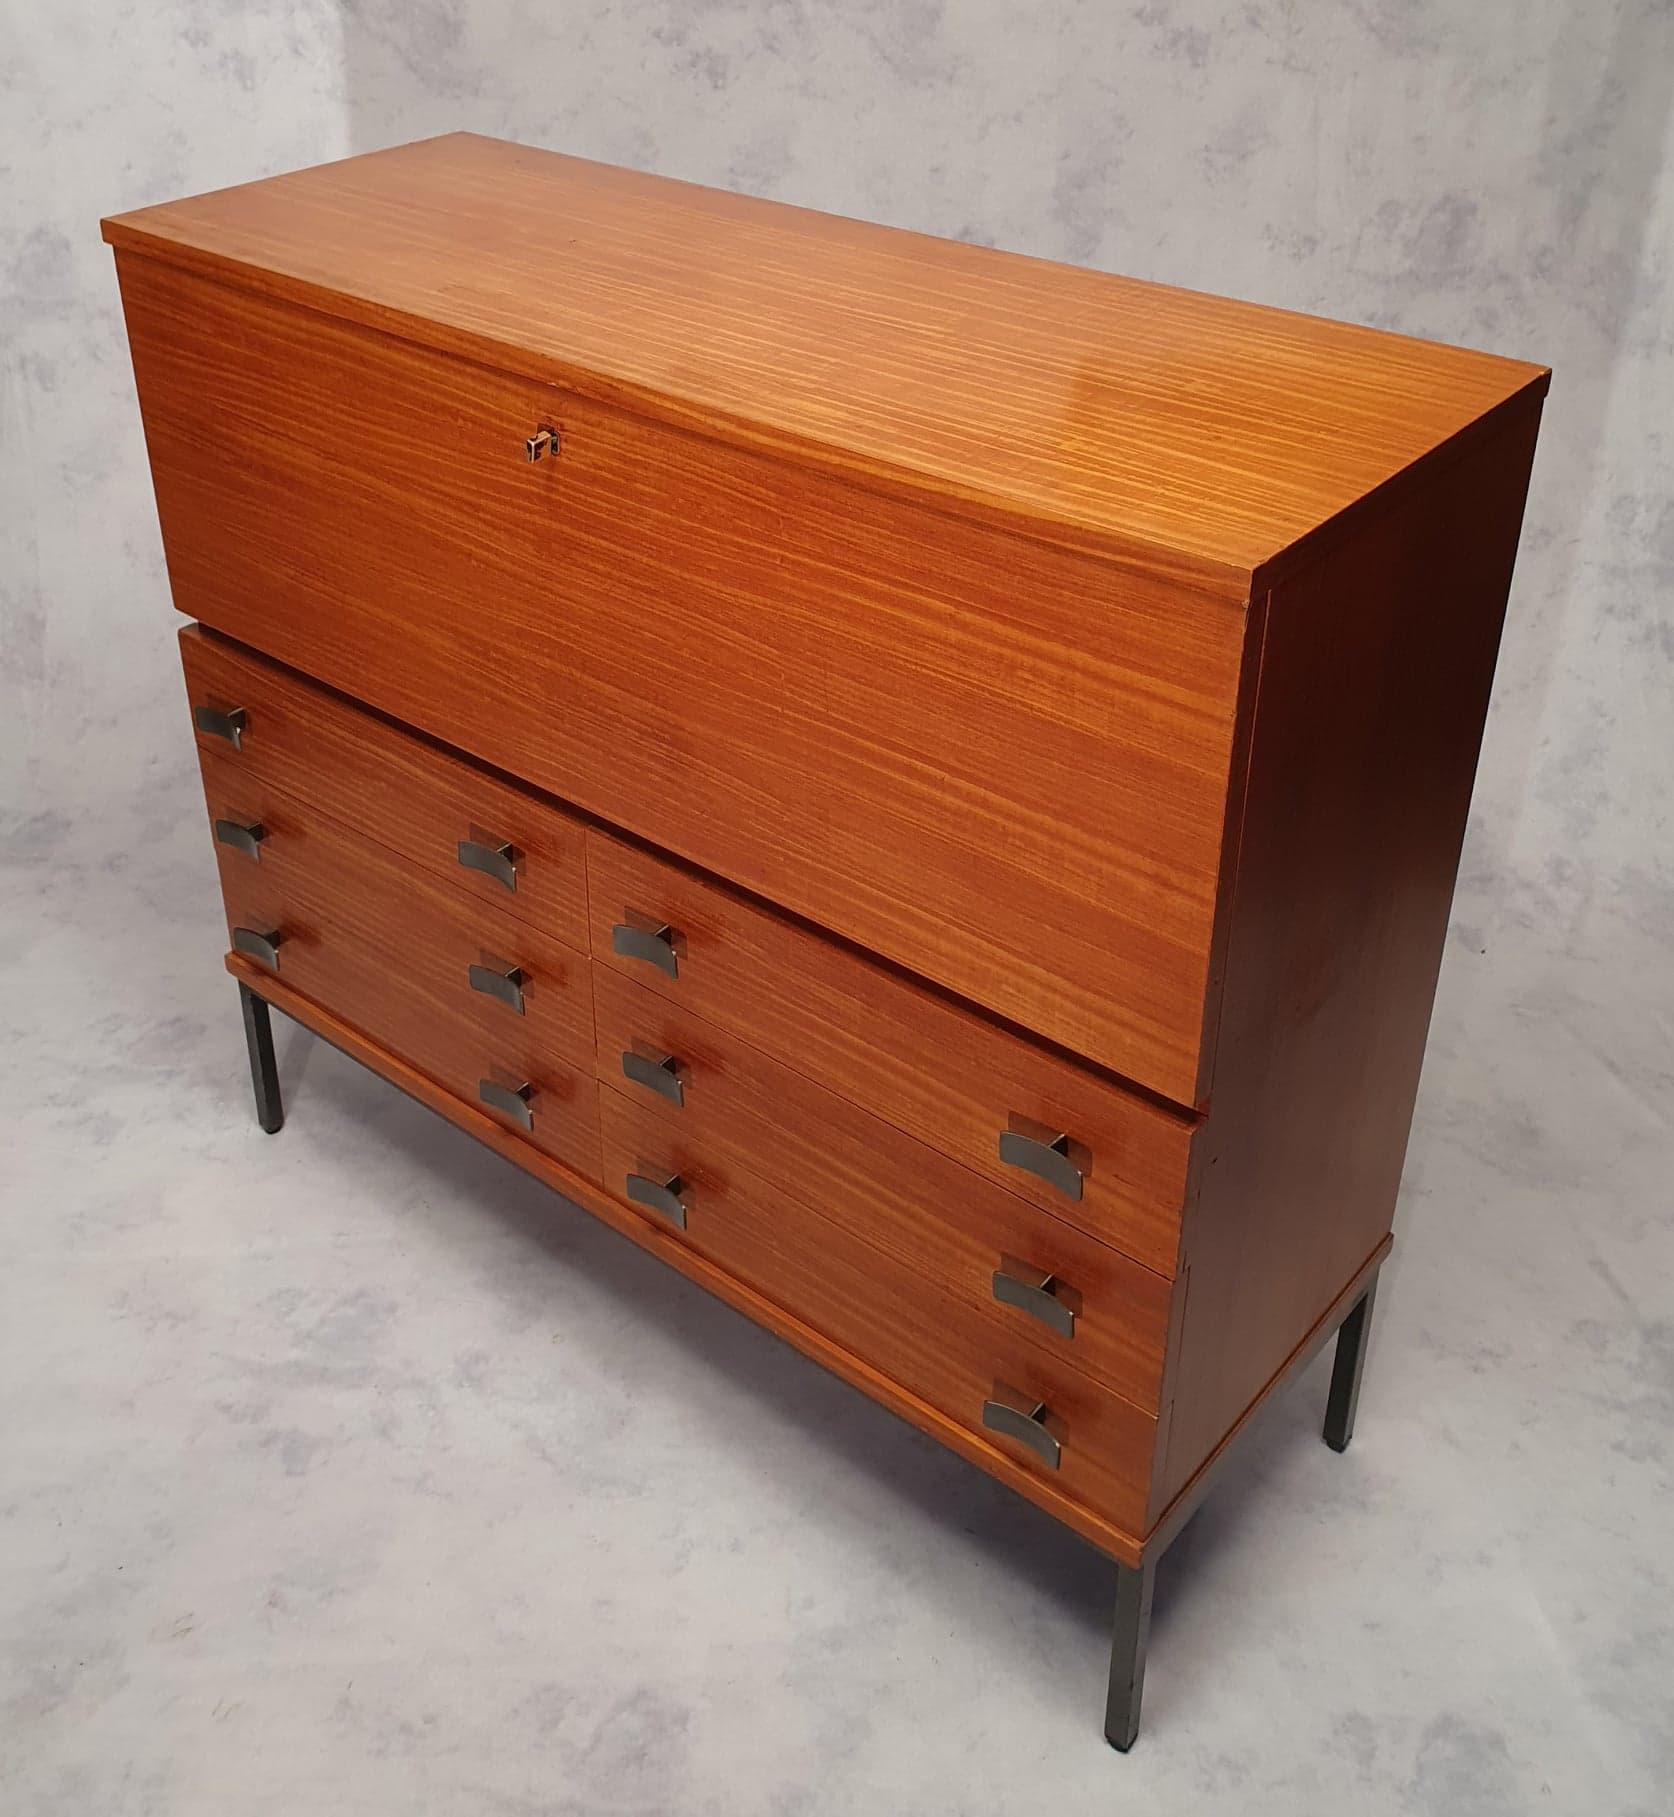 Magnificent modernist secretary by Antoine Philippon and Jacqueline Lecoq edited by Degorre in 1957. Exceptional work in satin ribbon and lacquered metal. Modernist pearl, the work of Philippon and Lecoq is focused on minimalist and elegant lines.